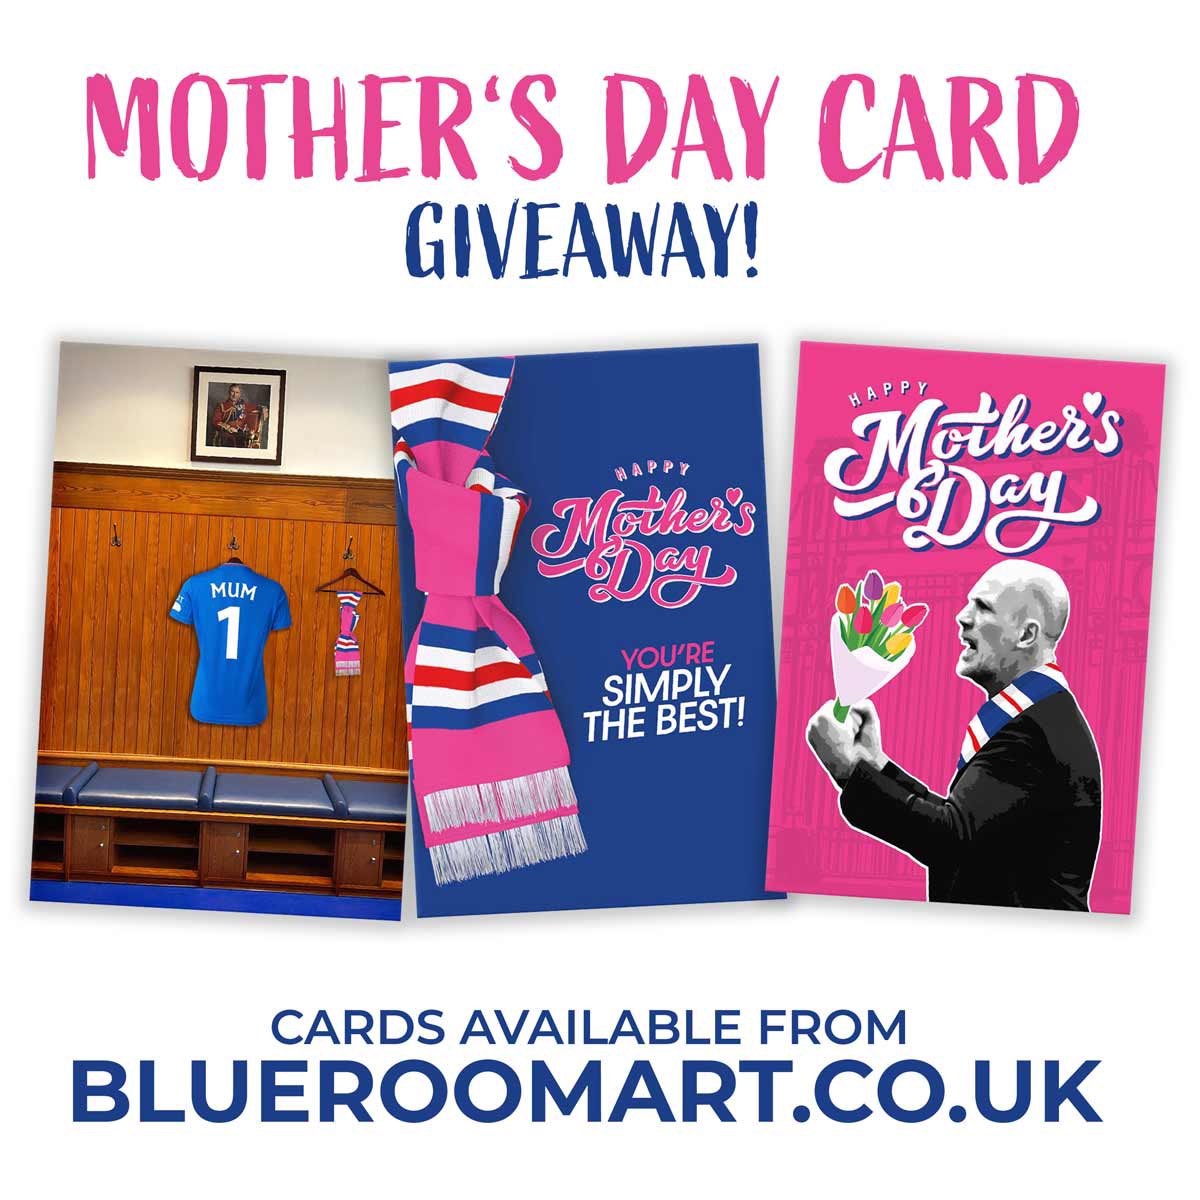 🇬🇧 MOTHER’S DAY CARD GIVEAWAY 💙 ⚽️ Each time RANGERS score against St Johnstone today we’ll giveaway the Mother’s Day card of your choice from blueroomart.co.uk ▶️ Simply LIKE and REPOST to enter. 🔵⚪️🔴 One winner picked at random each time Rangers score! #RangersFC